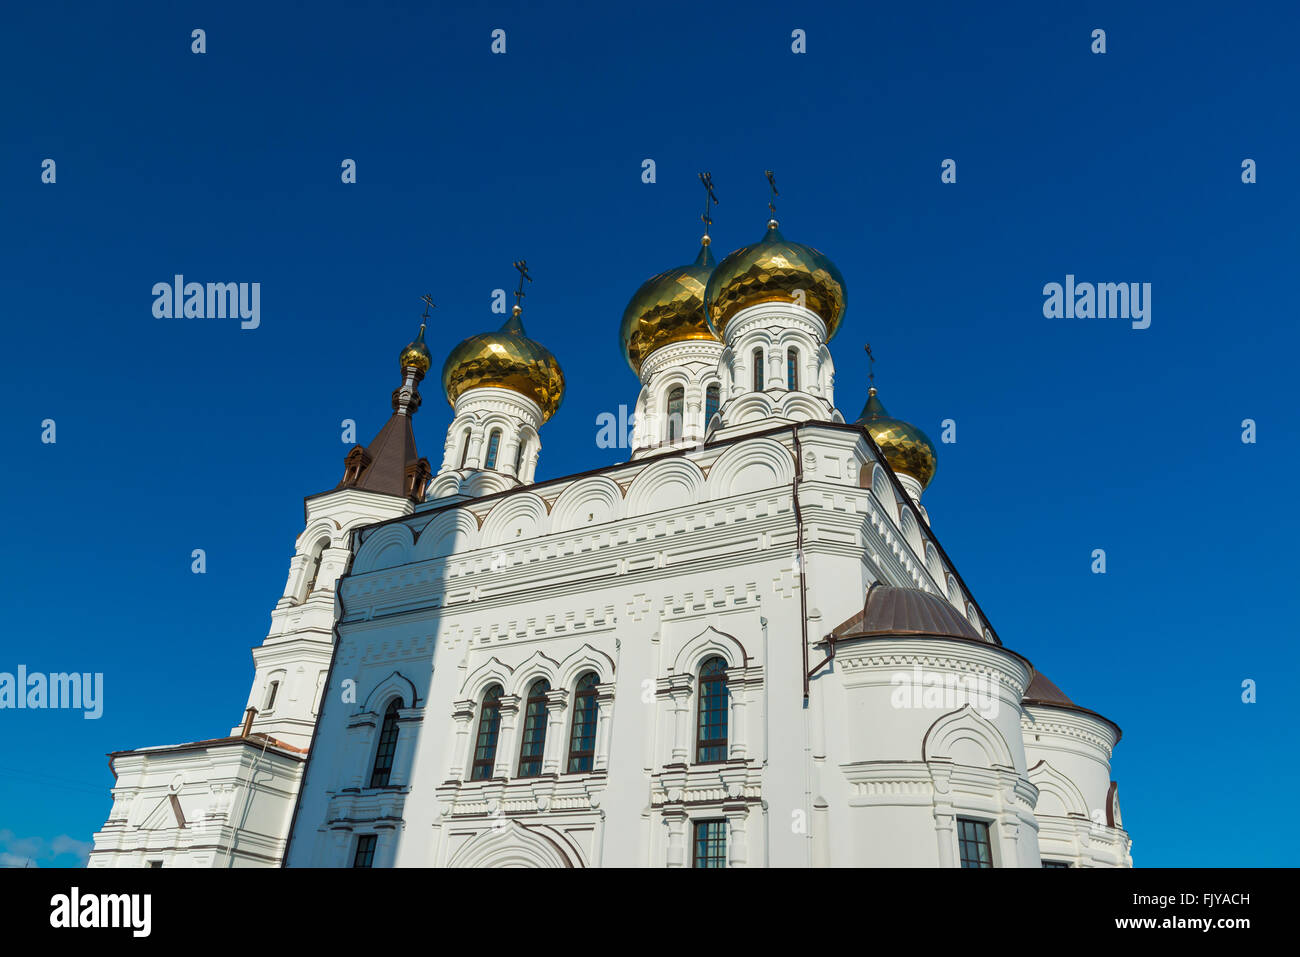 Church of Alexander Nevsky at Railway Square in Tver, Russia Stock Photo